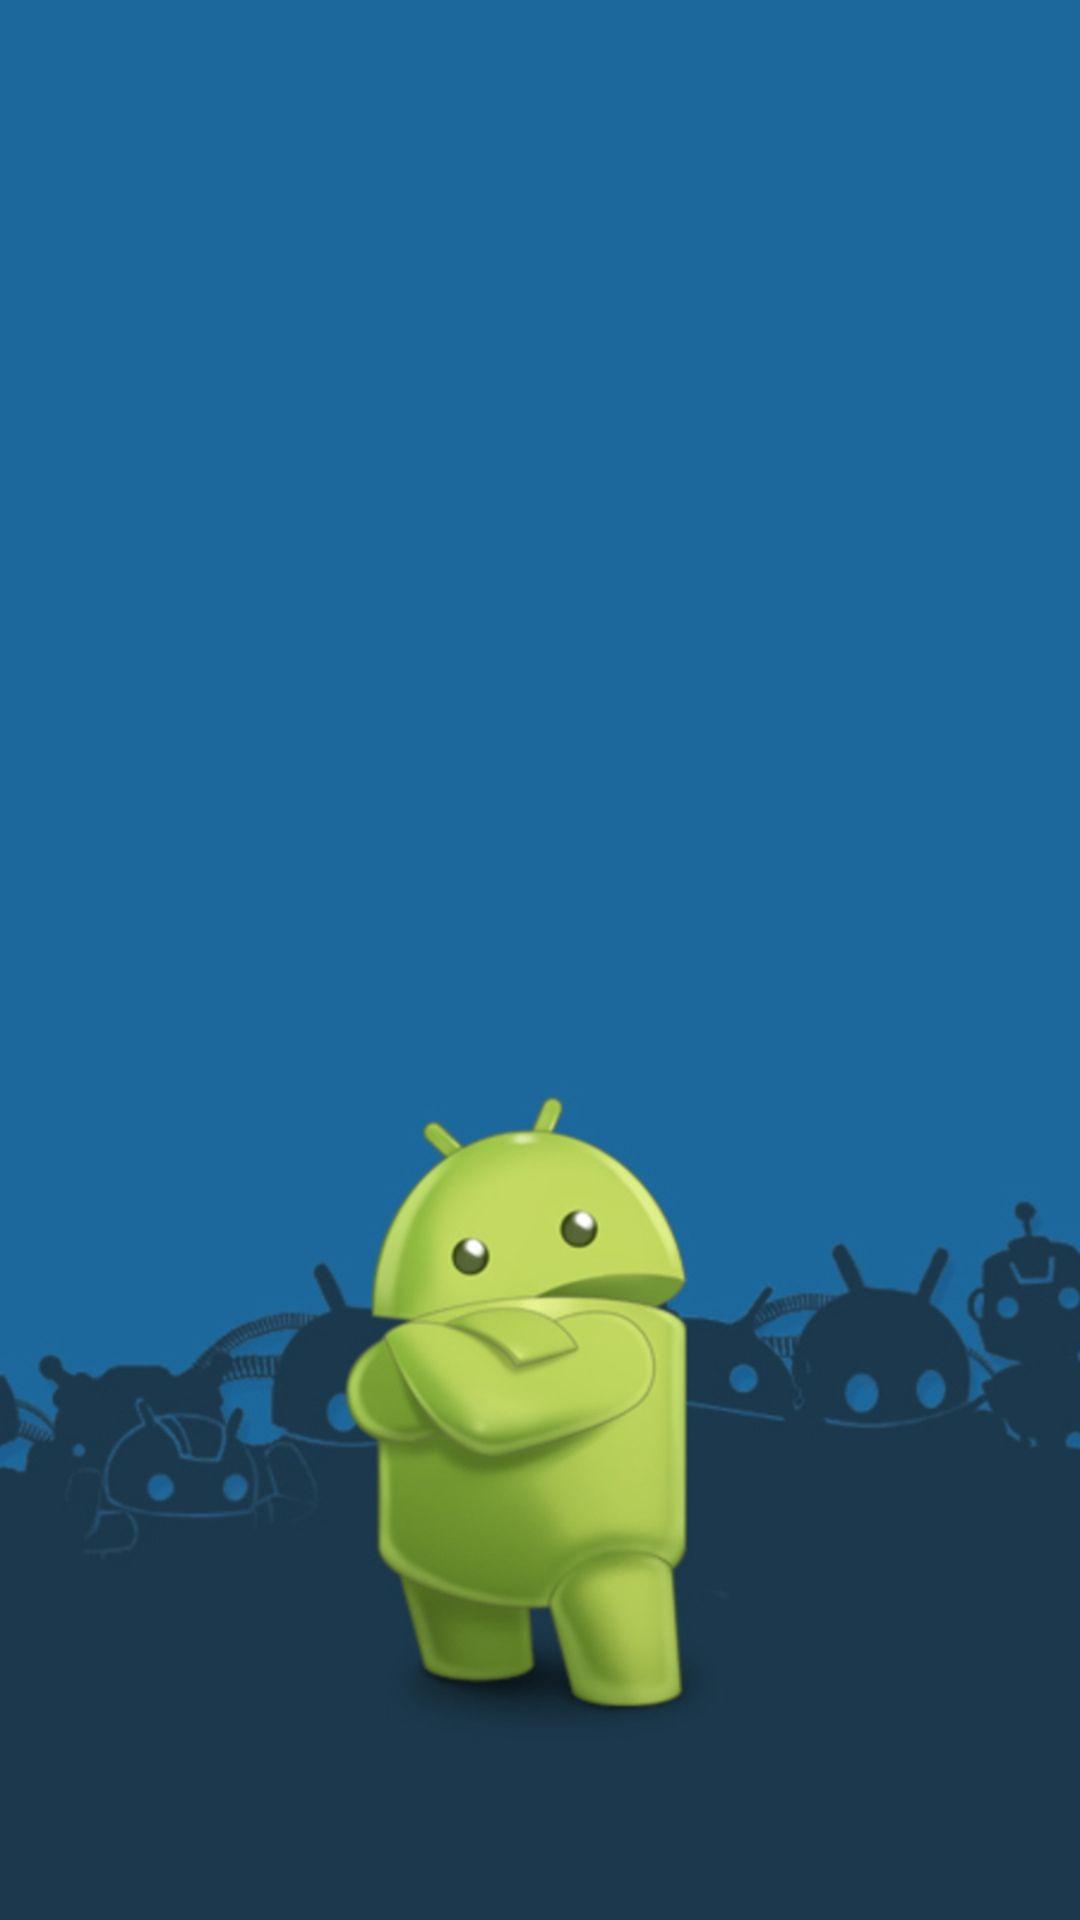 Cool android logo wallpapers